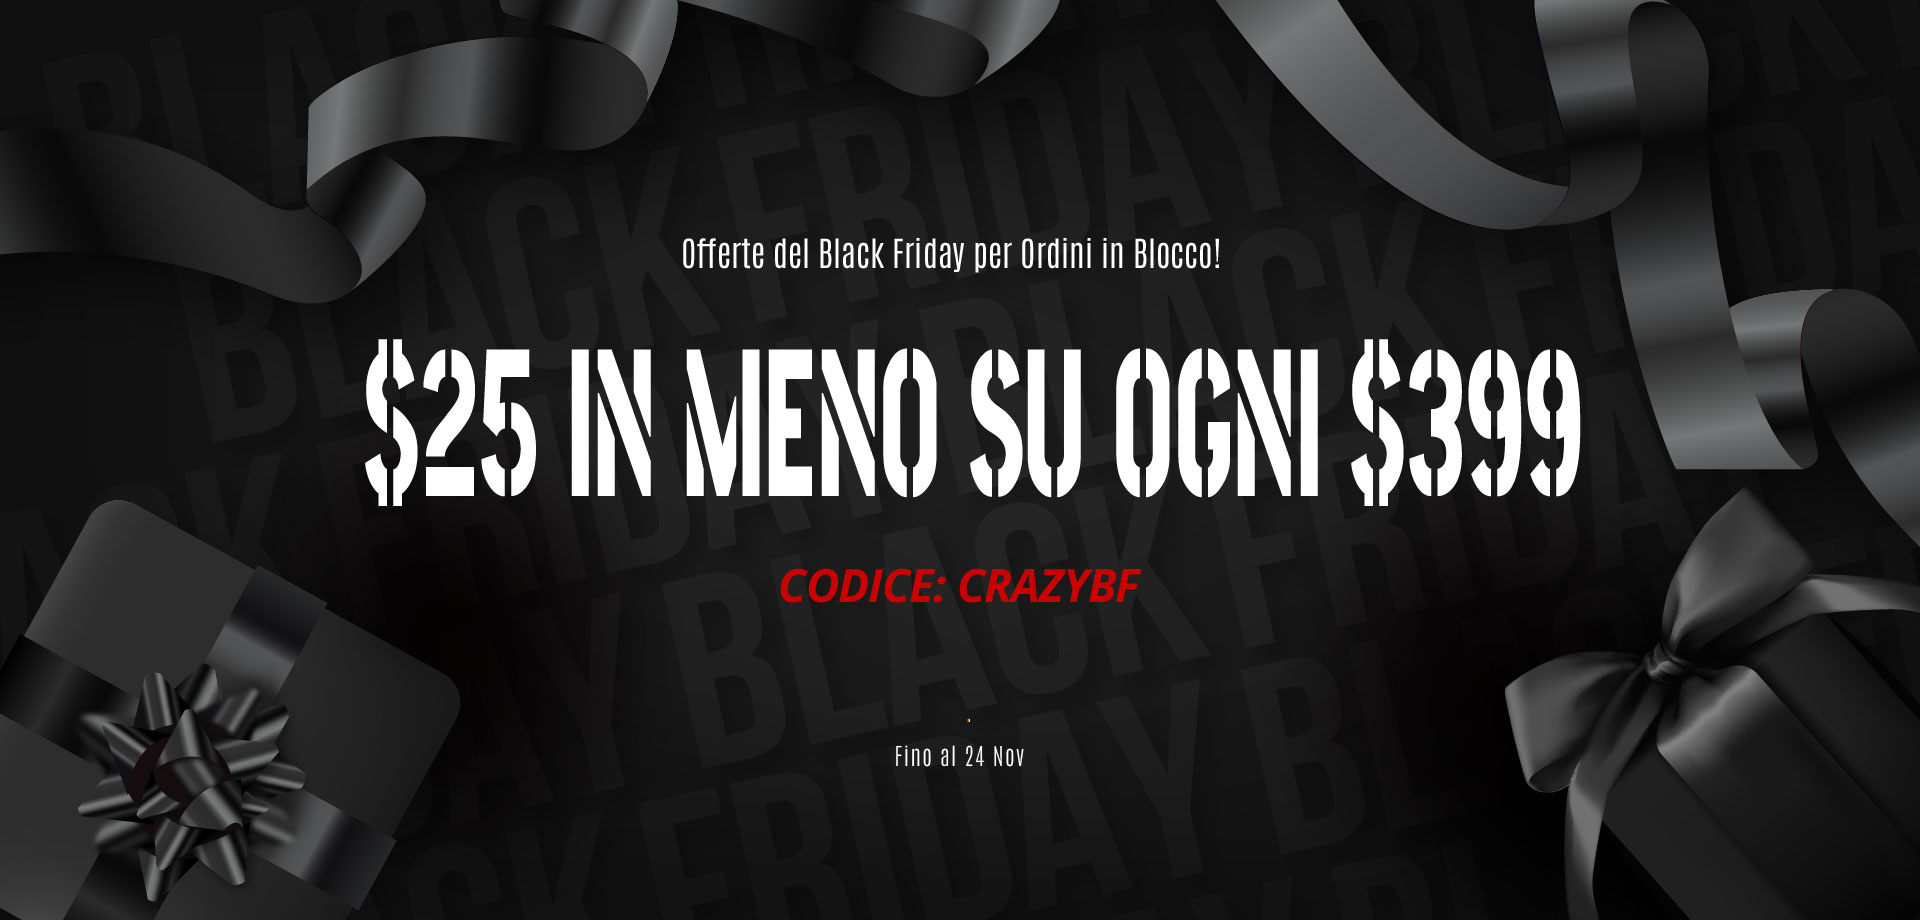 Black Friday landing page banner PC-it